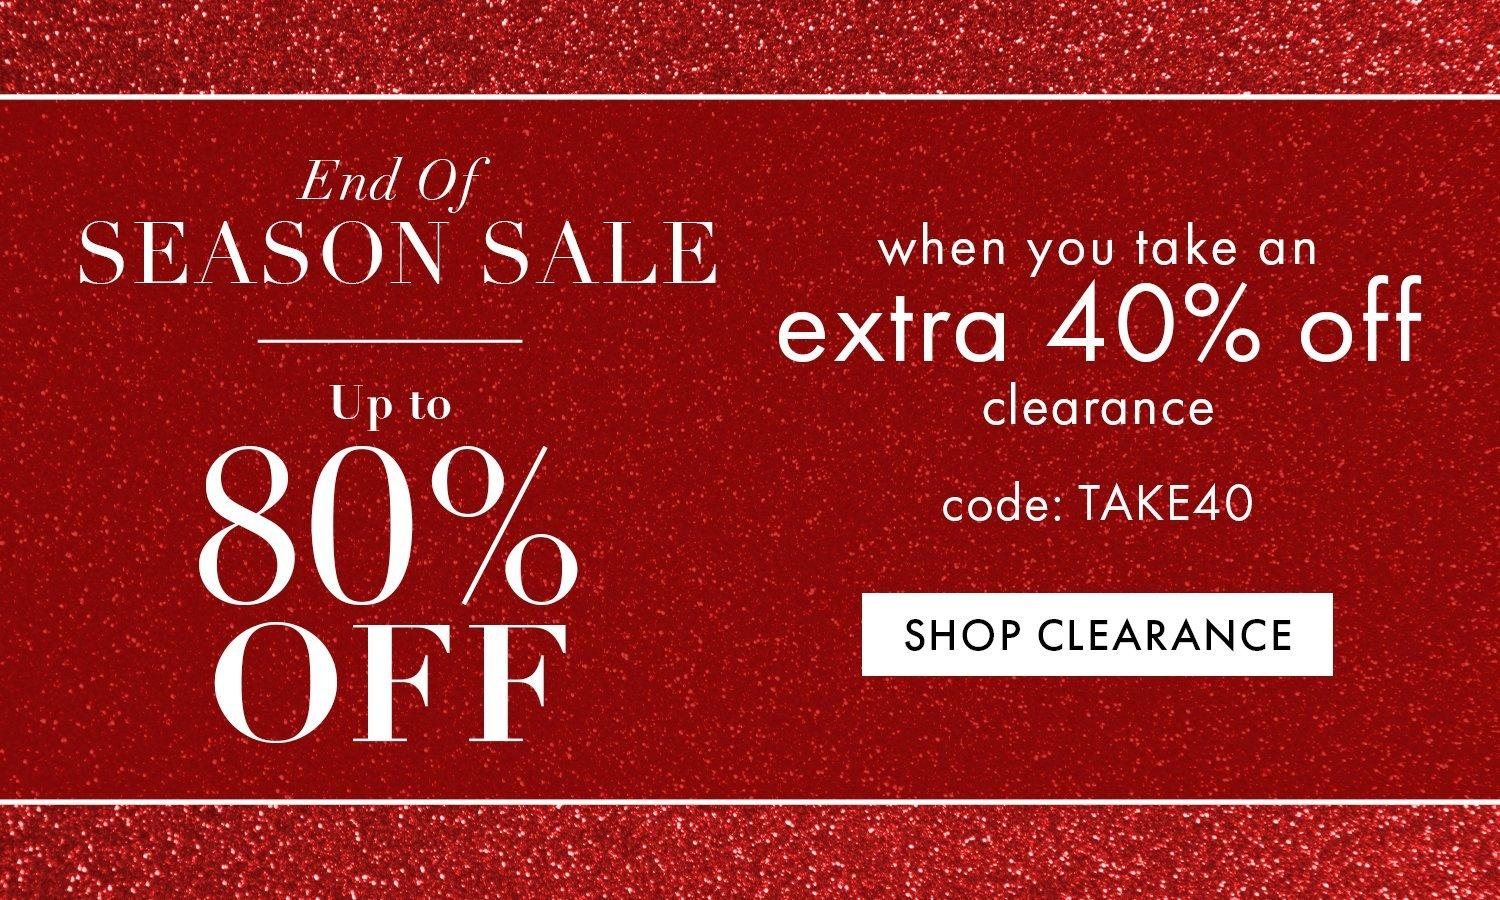 white text on a red sparkling background: end of season sale. up to 80% off when you take an extra 40% off clearance. code: take40